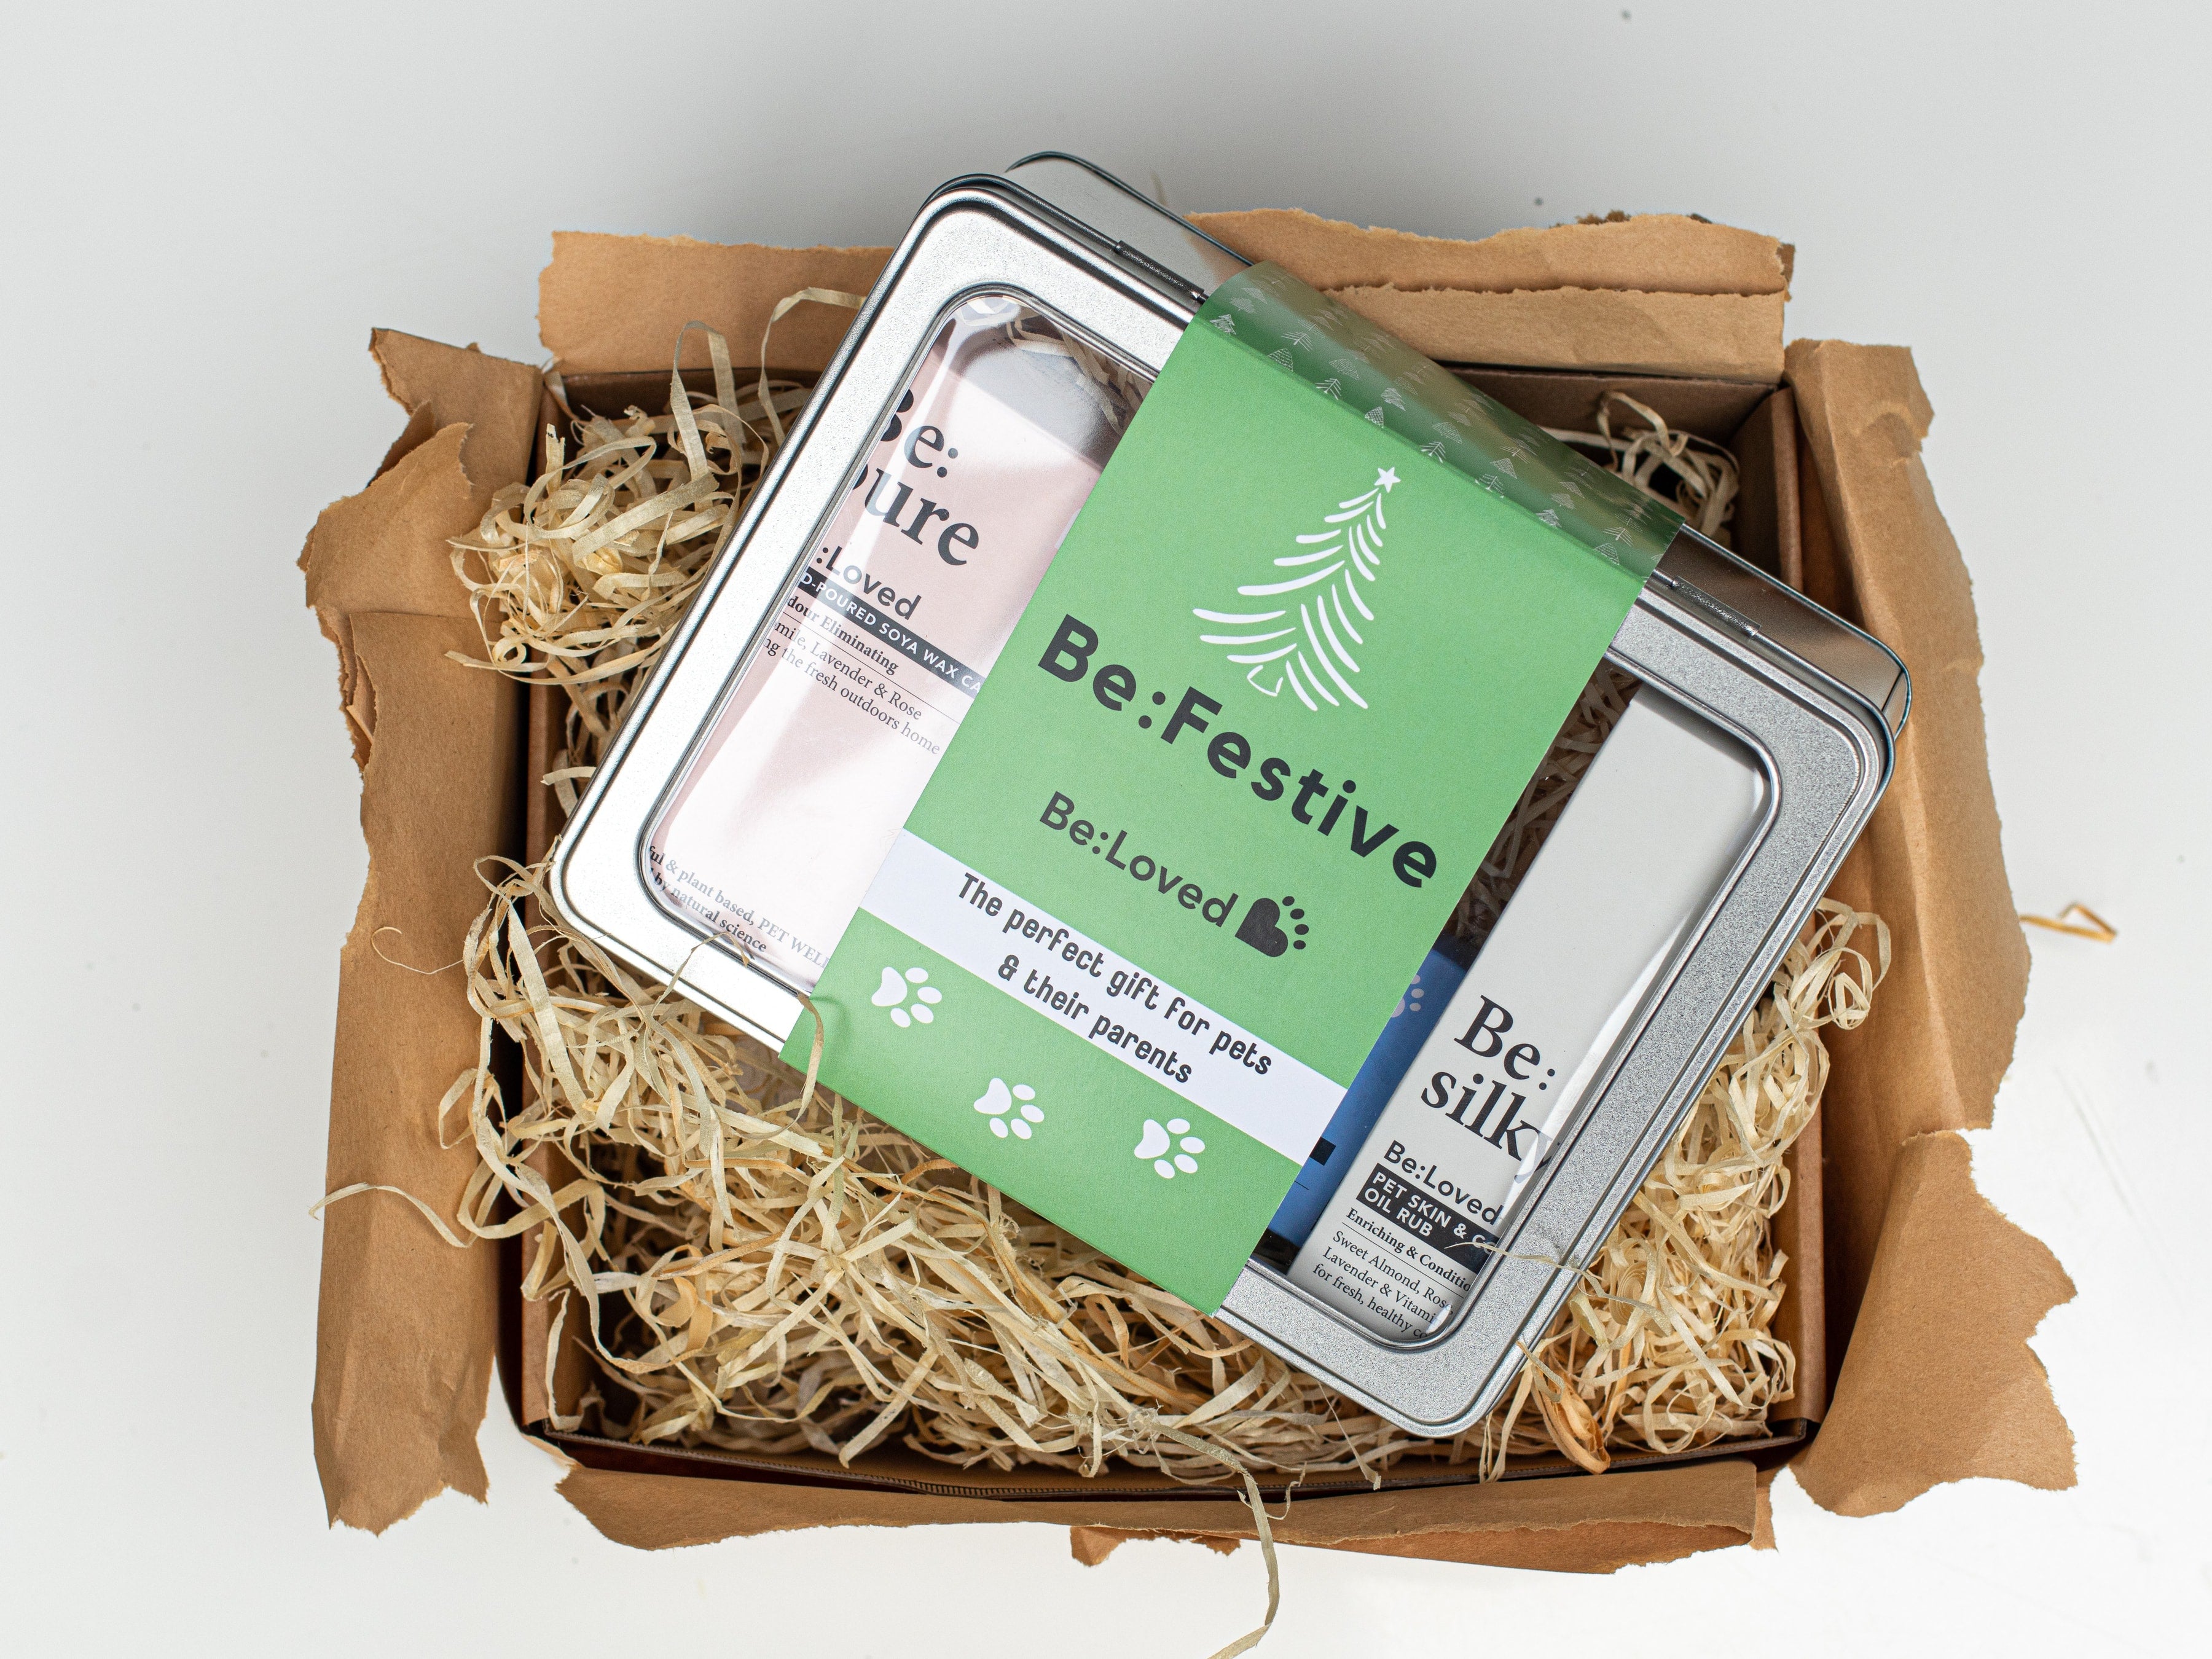 Be:Festive gift set in a box with straw and brown wrapping paper